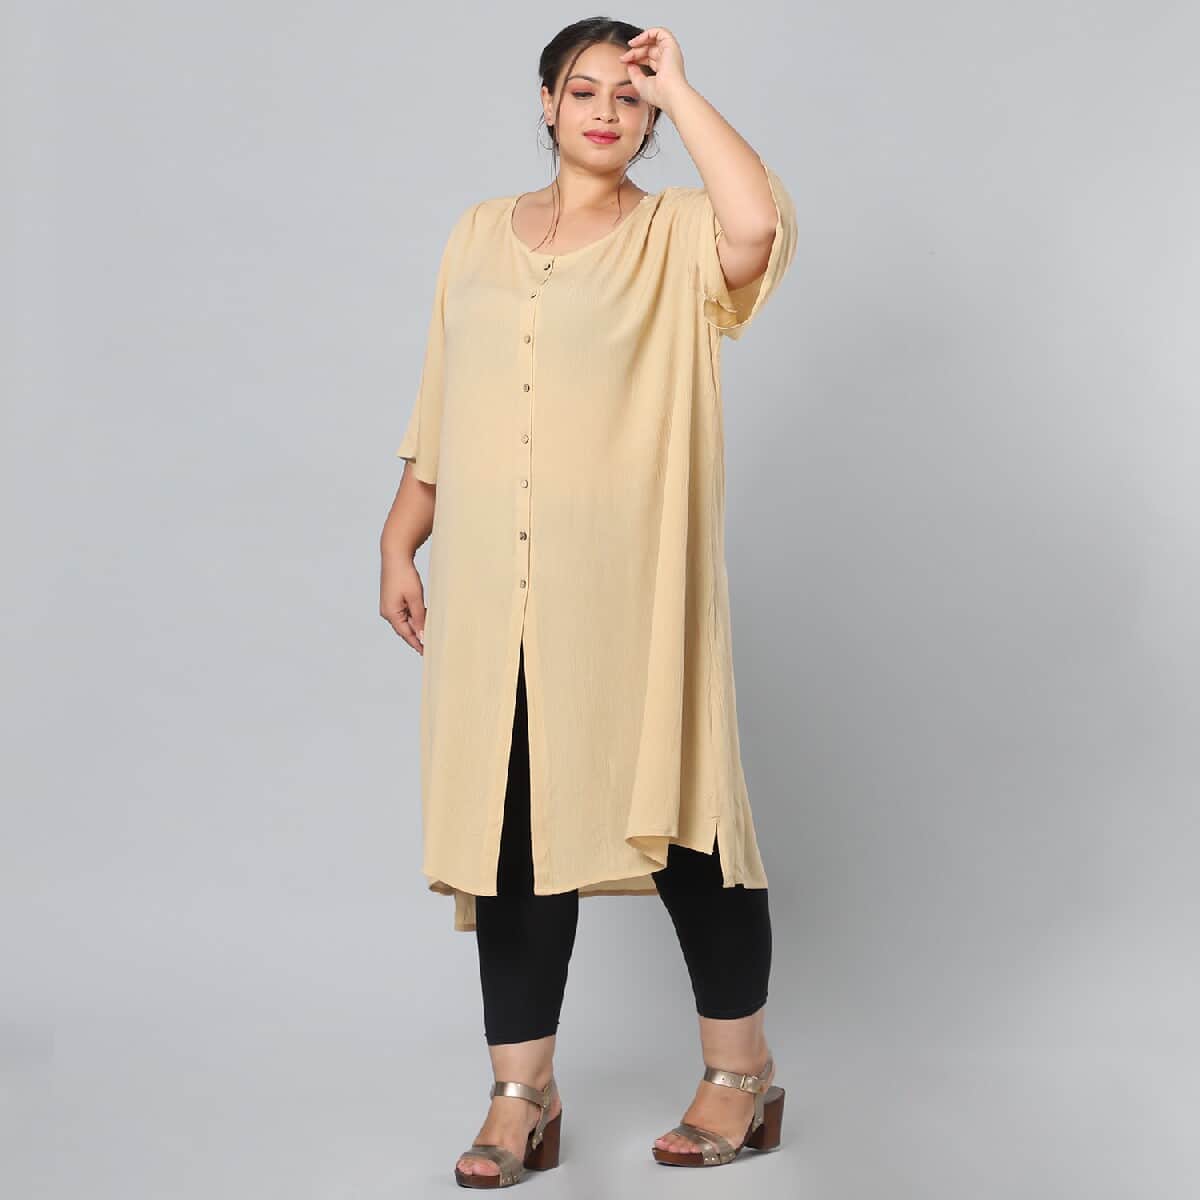 Beige 100% Rayon Top with Front Closure with Button- XXL/XXXL image number 3